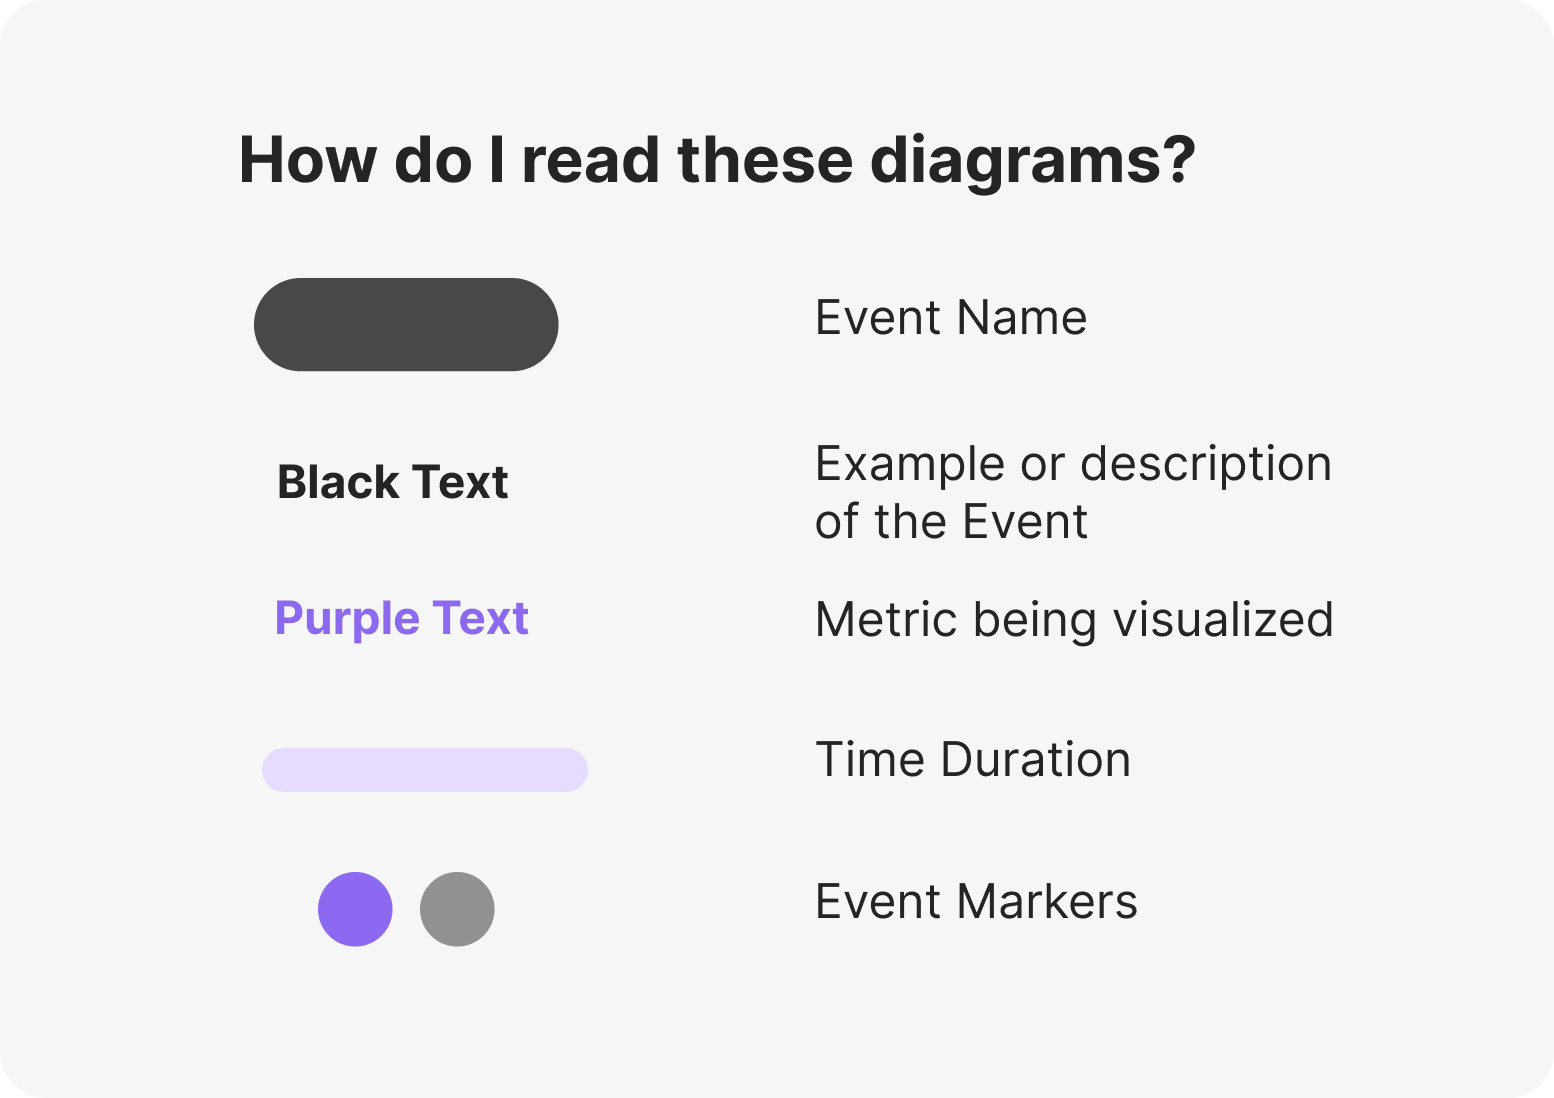 How to read diagrams